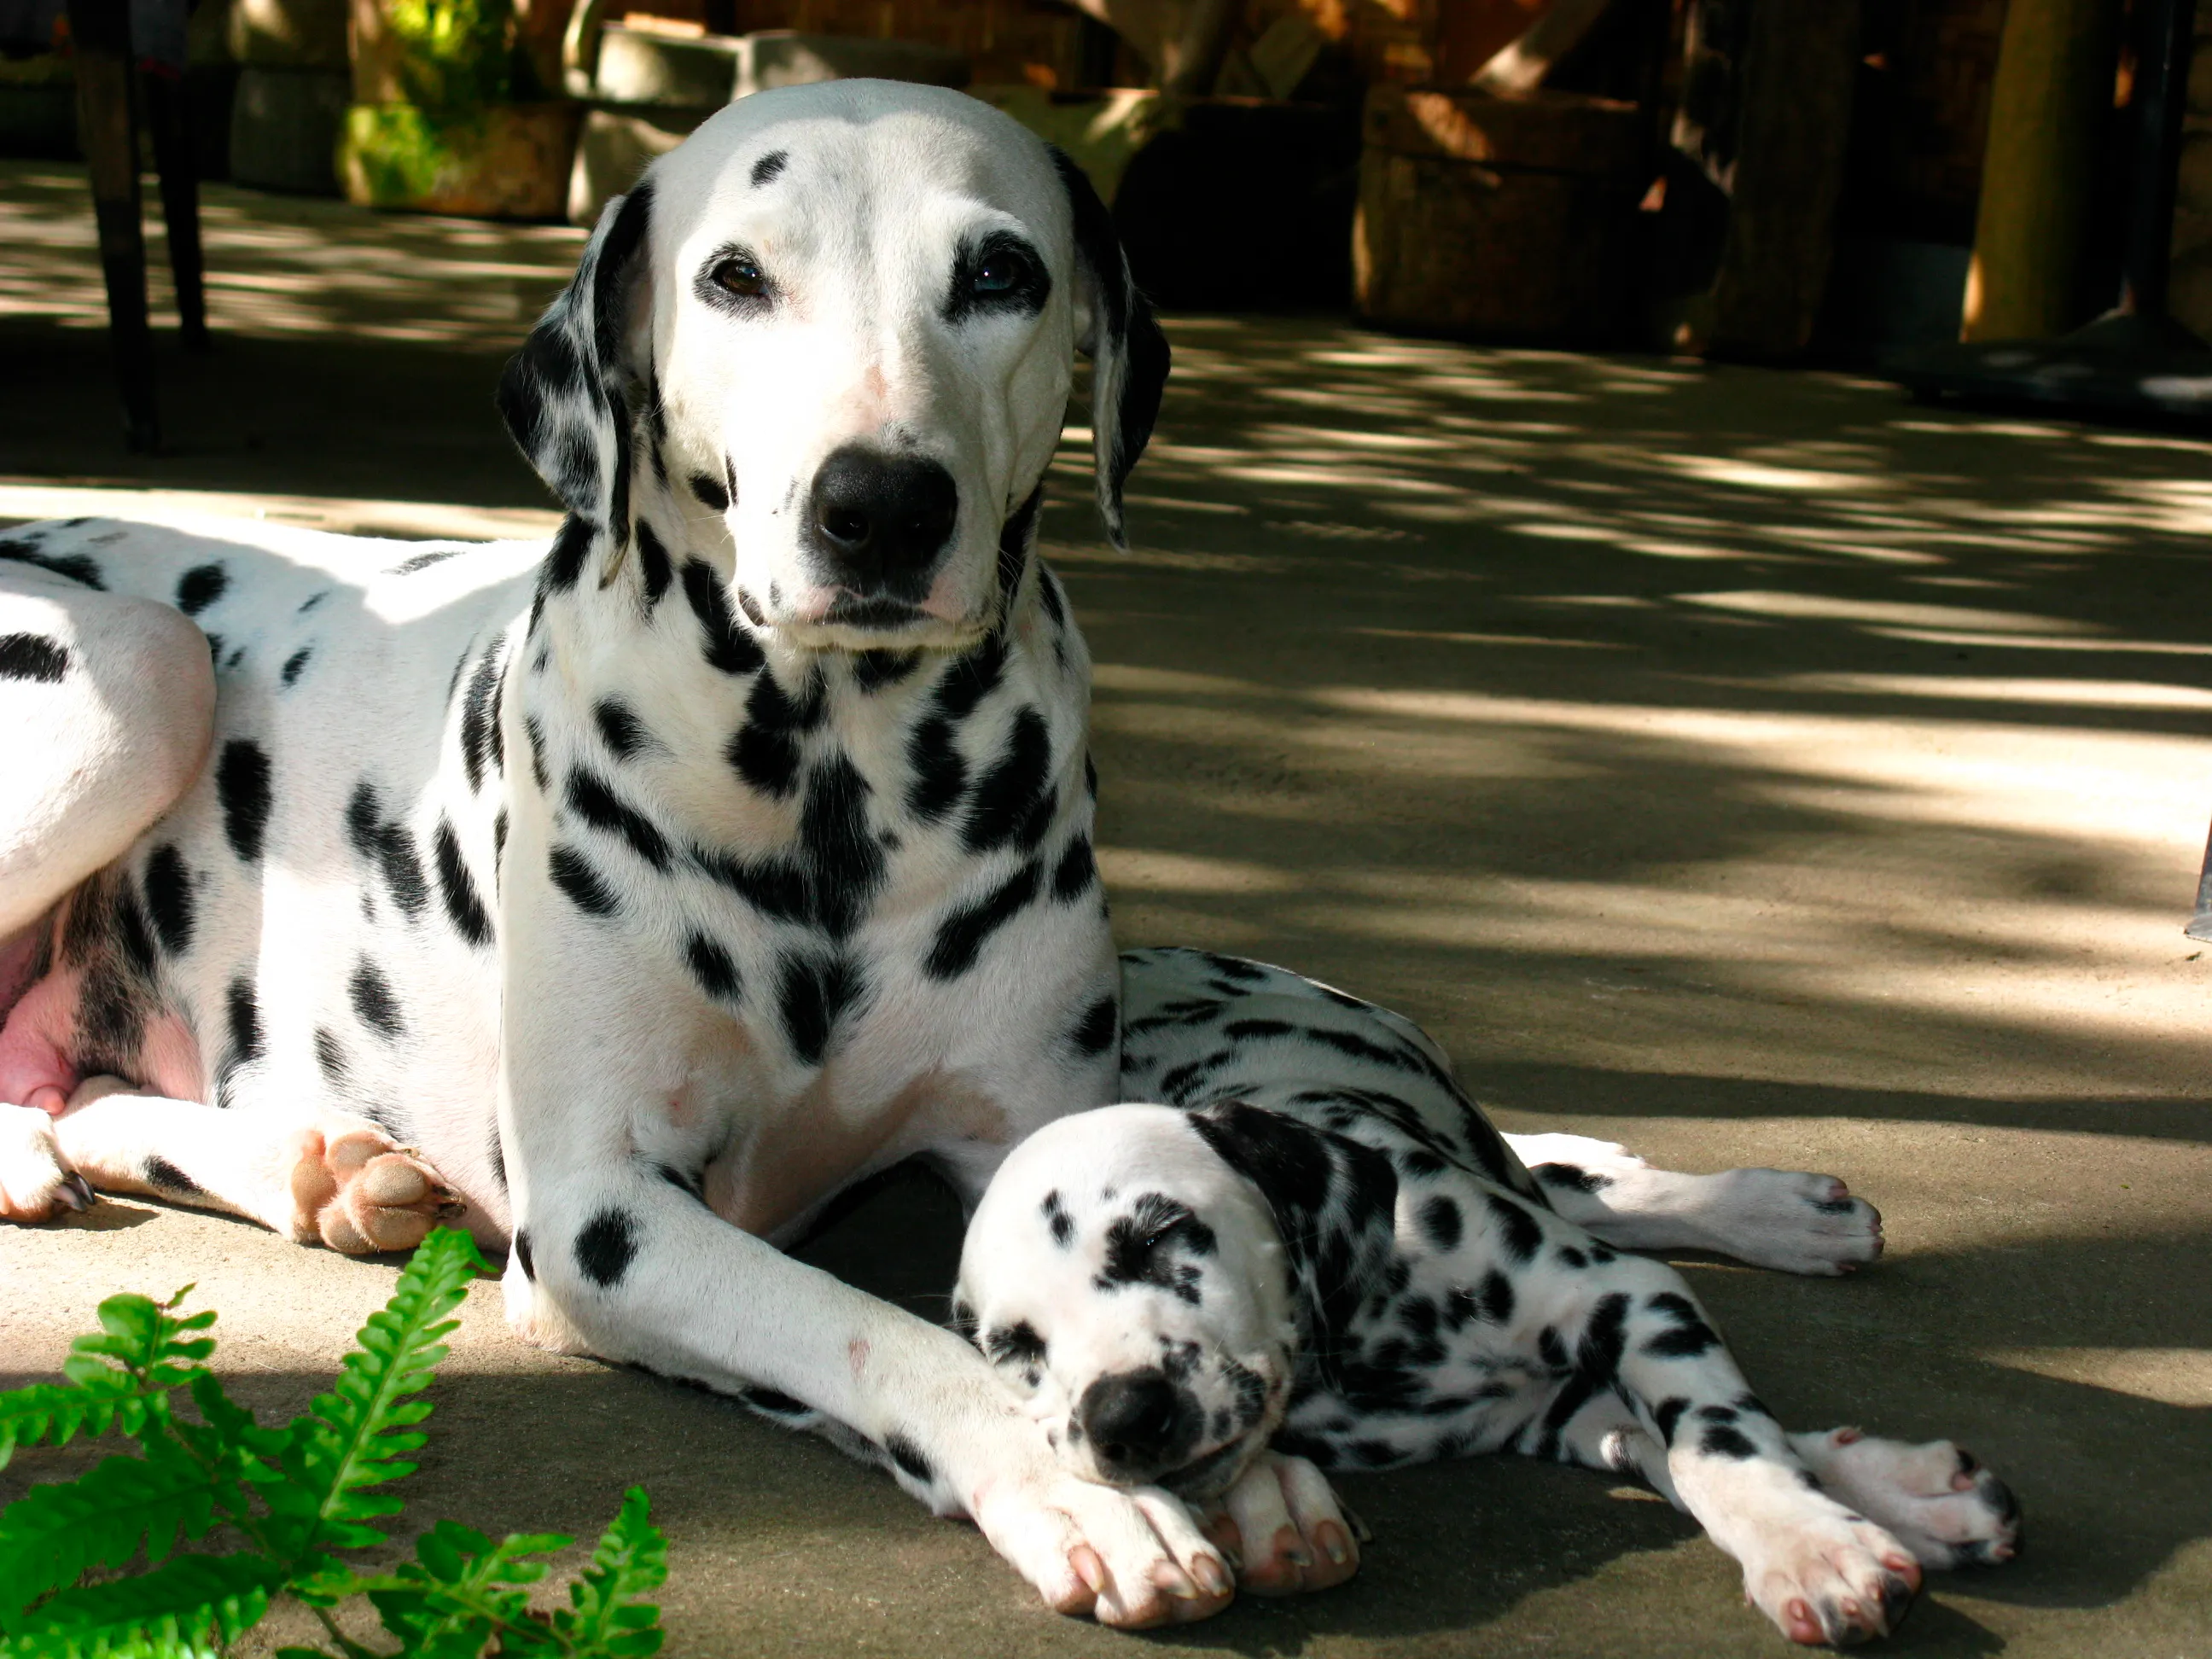 A Dalmatian mother and her puppy